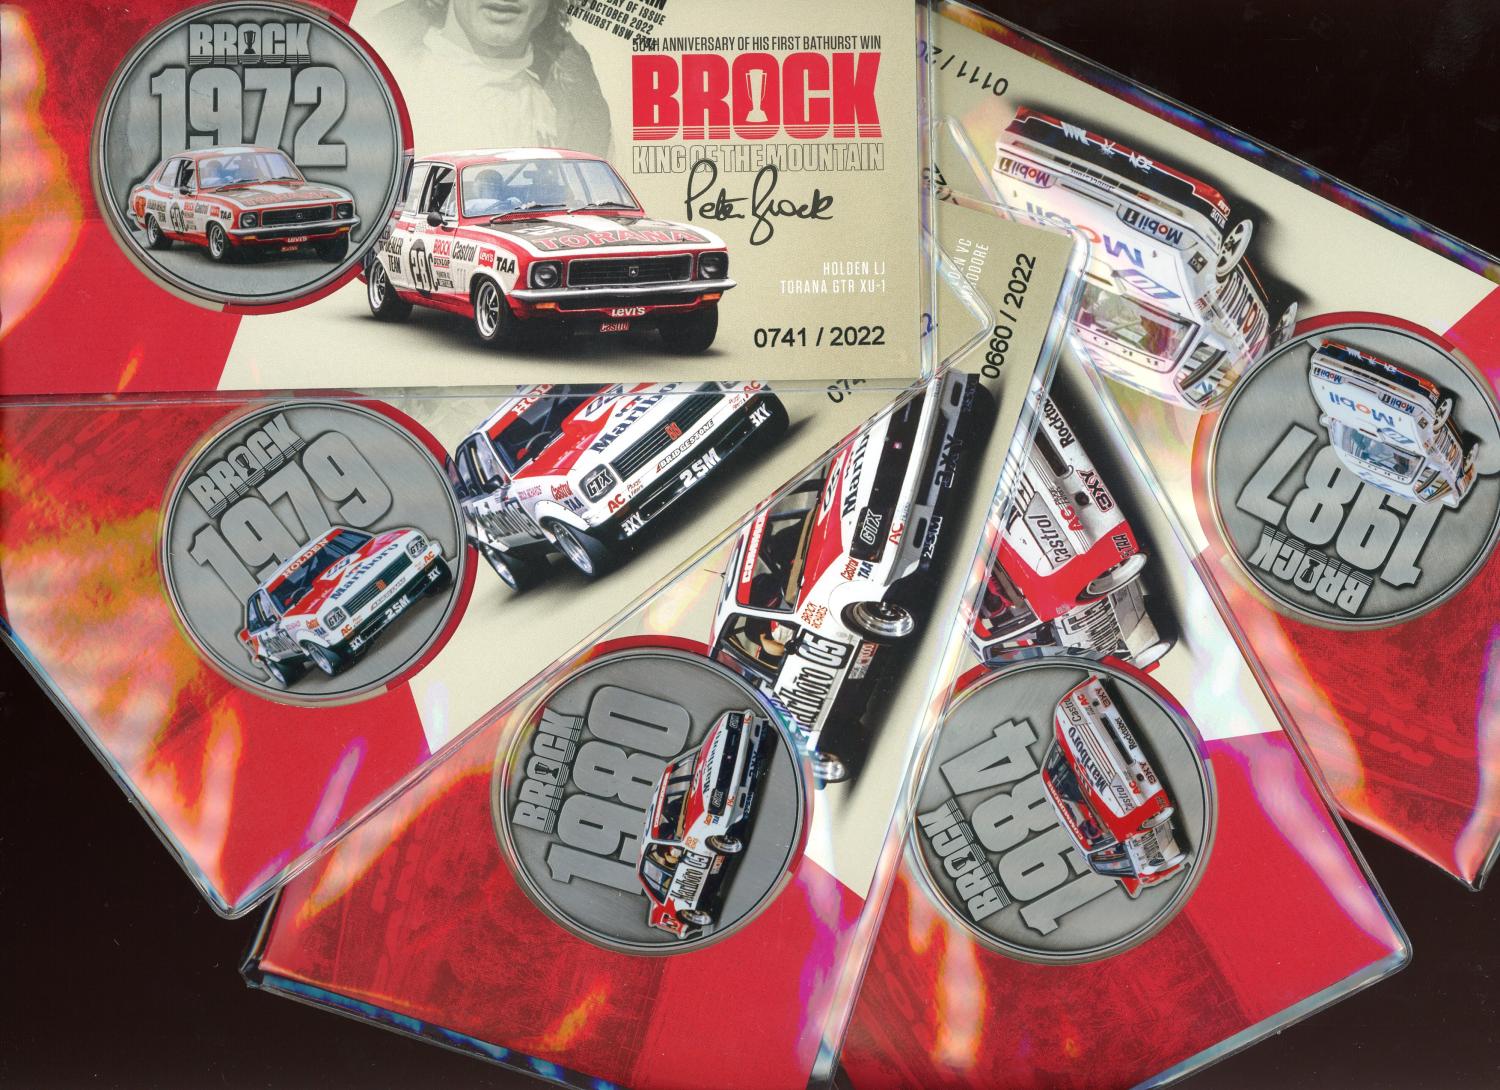 Thumbnail for 2022 Peter Brock Set of 5 Medallic PNC's - 50th Anniversary of his 1st Bathurst Win